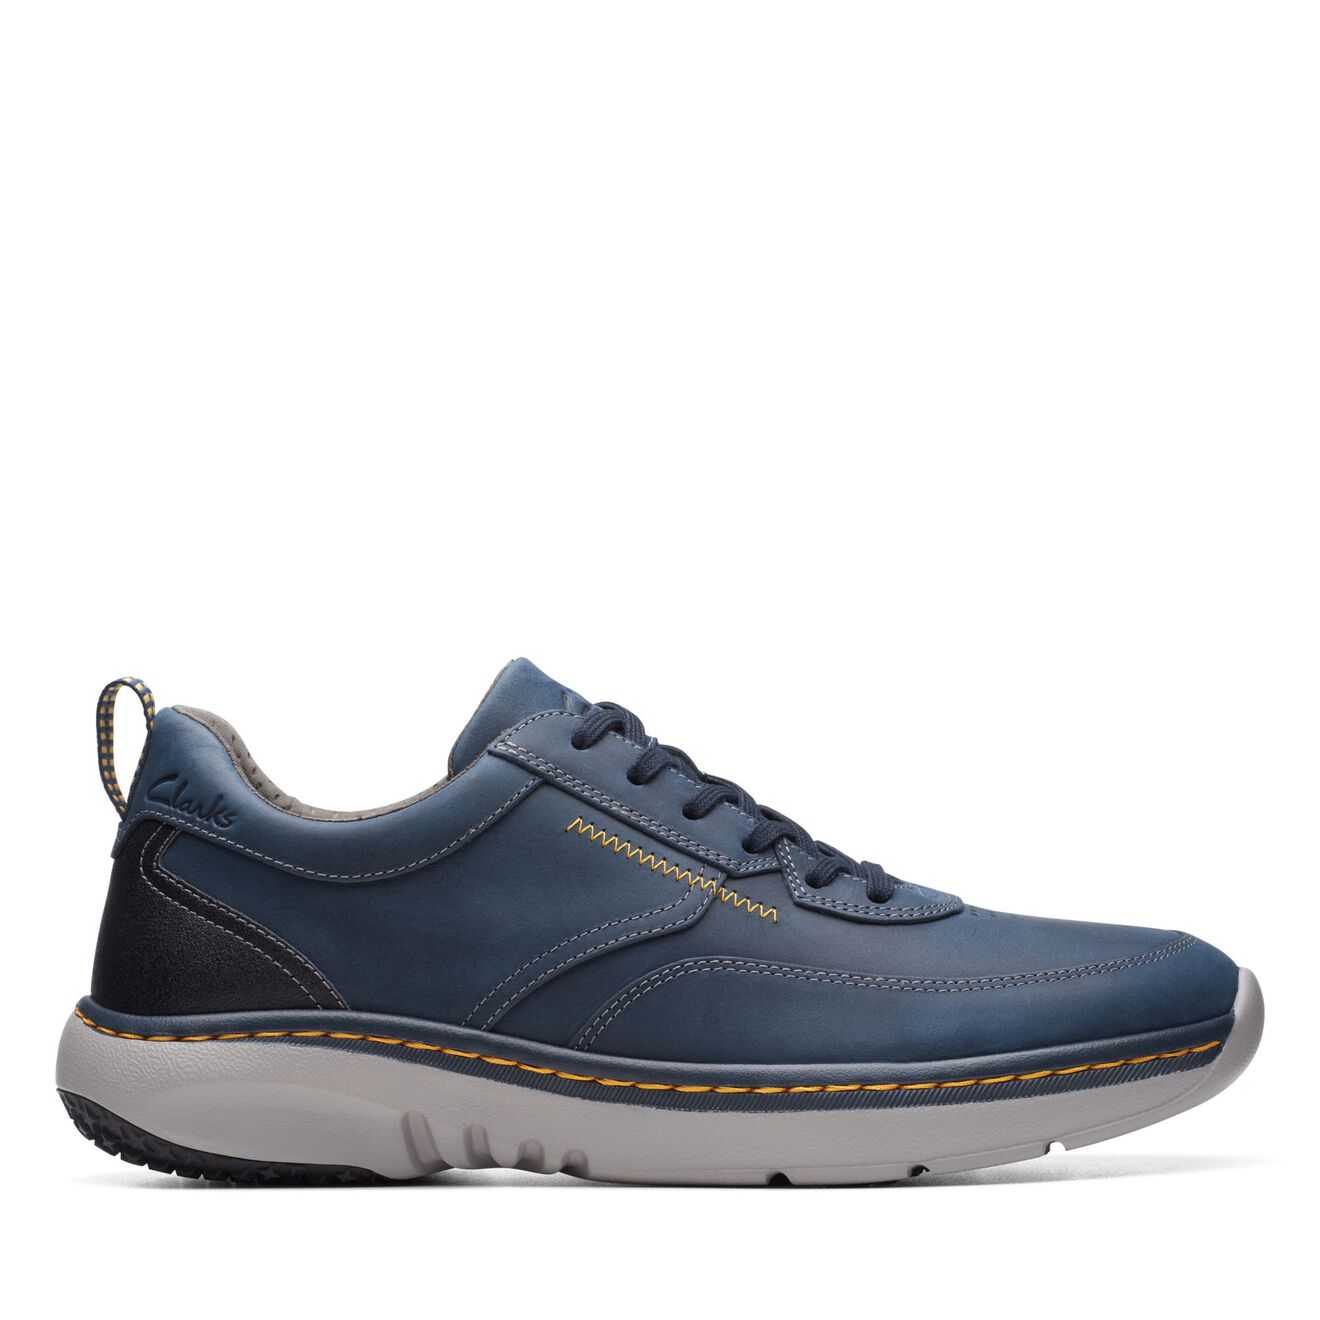 ClarksPro Lace Navy Leather